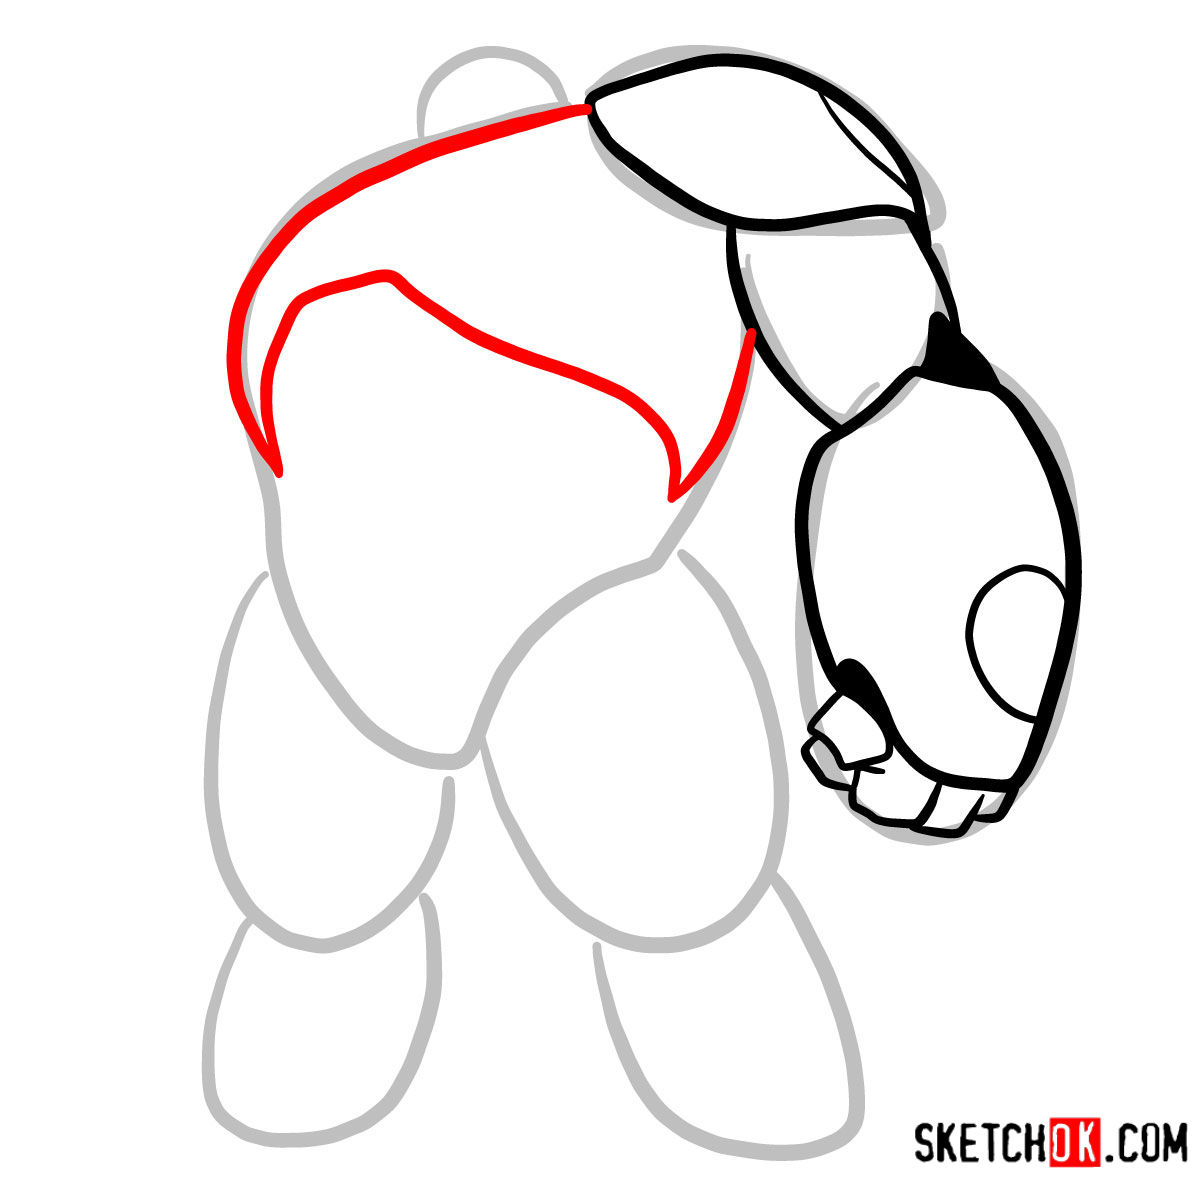 How to draw Baymax in his red armored suit - step 04